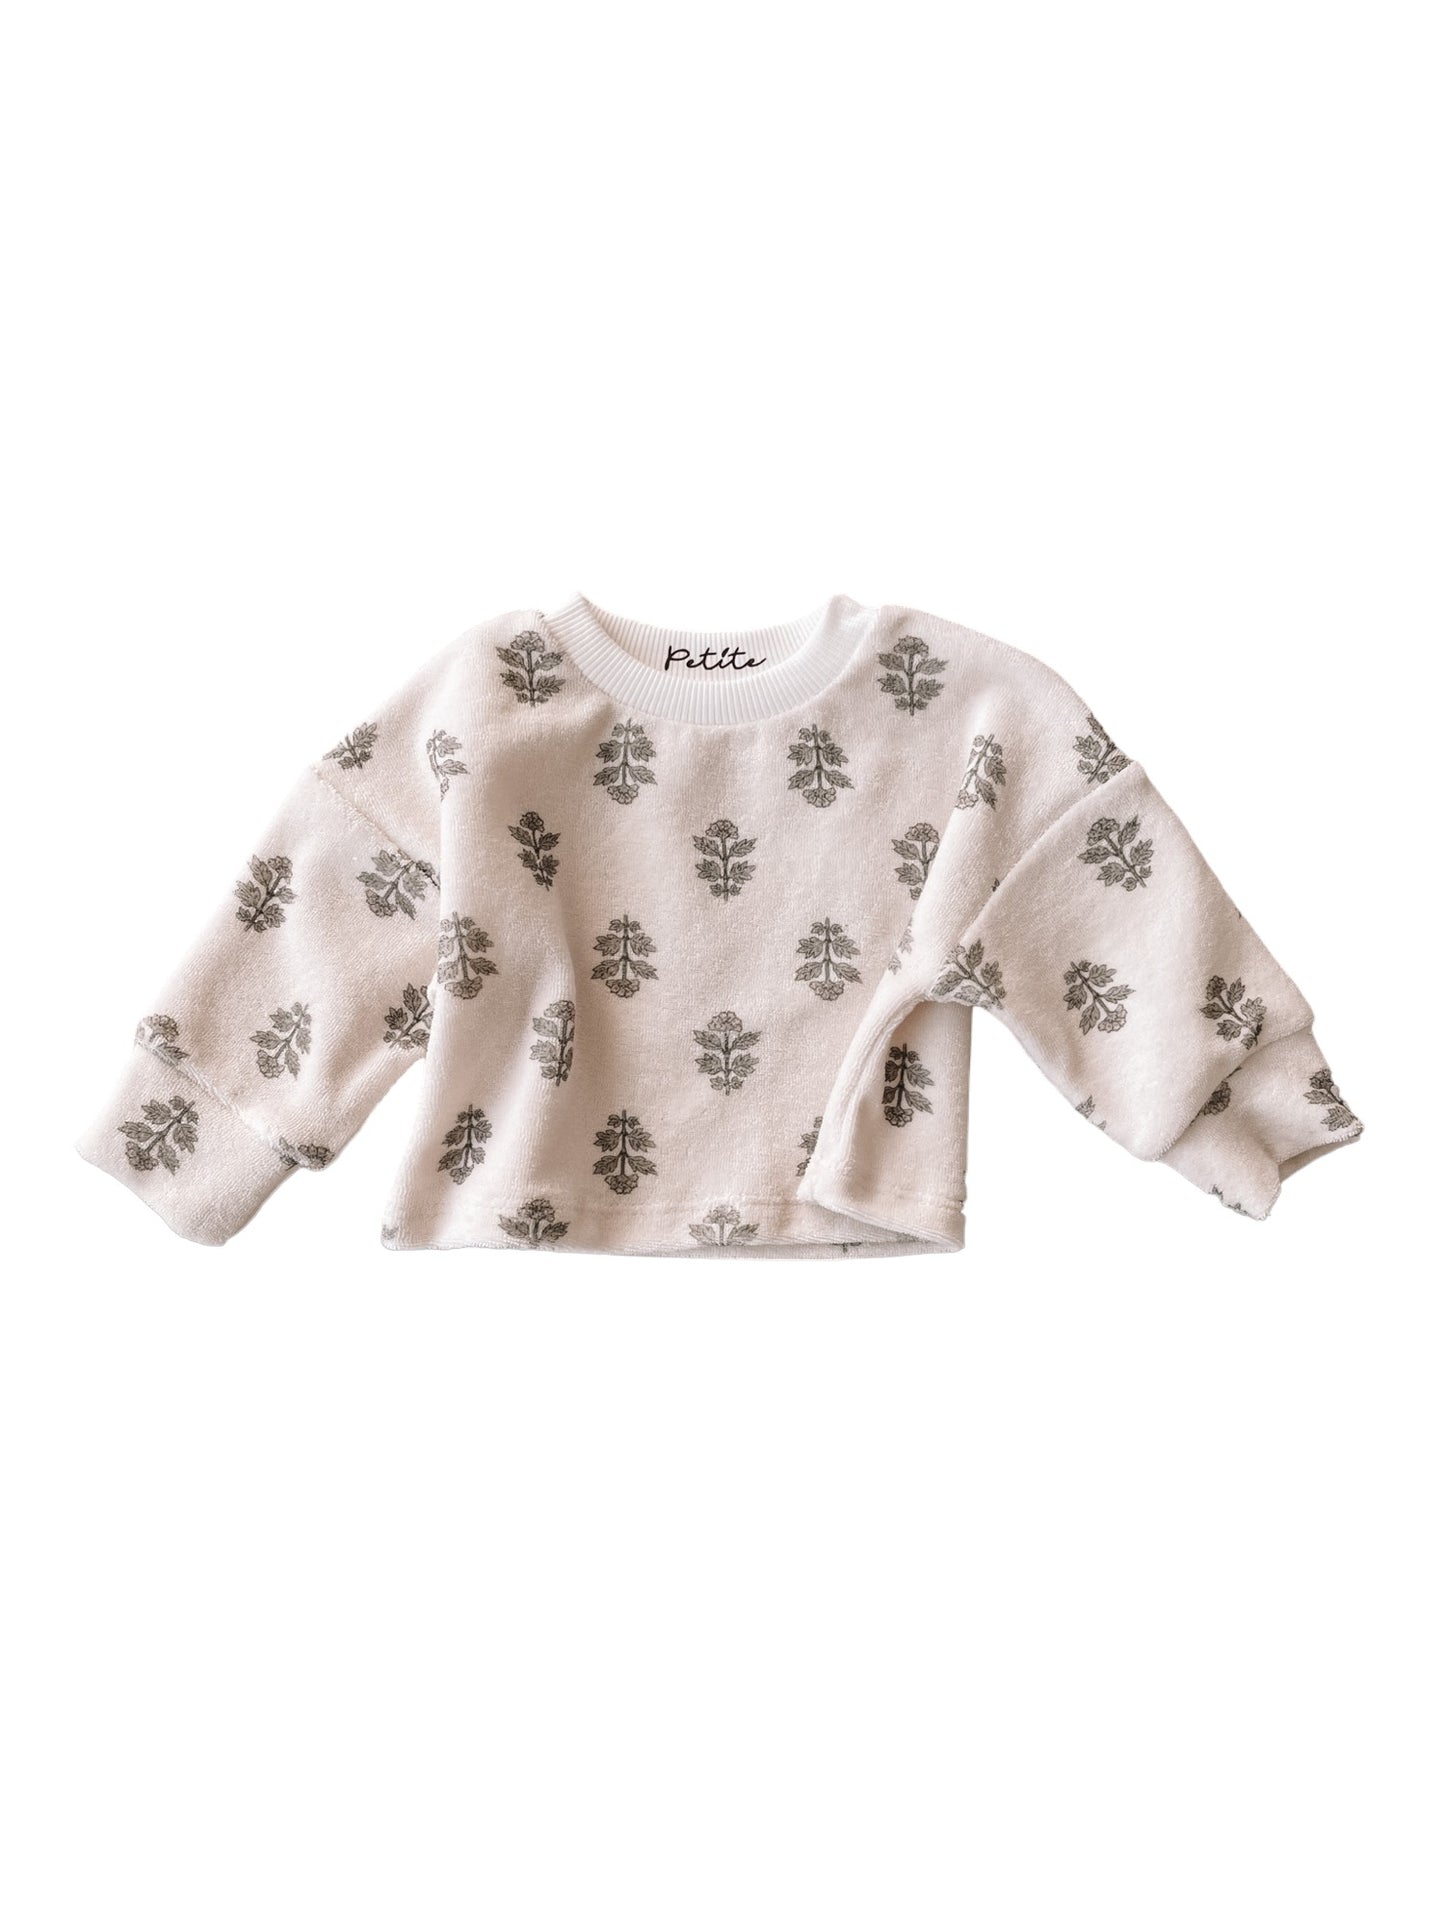 Terry sweater / just floral